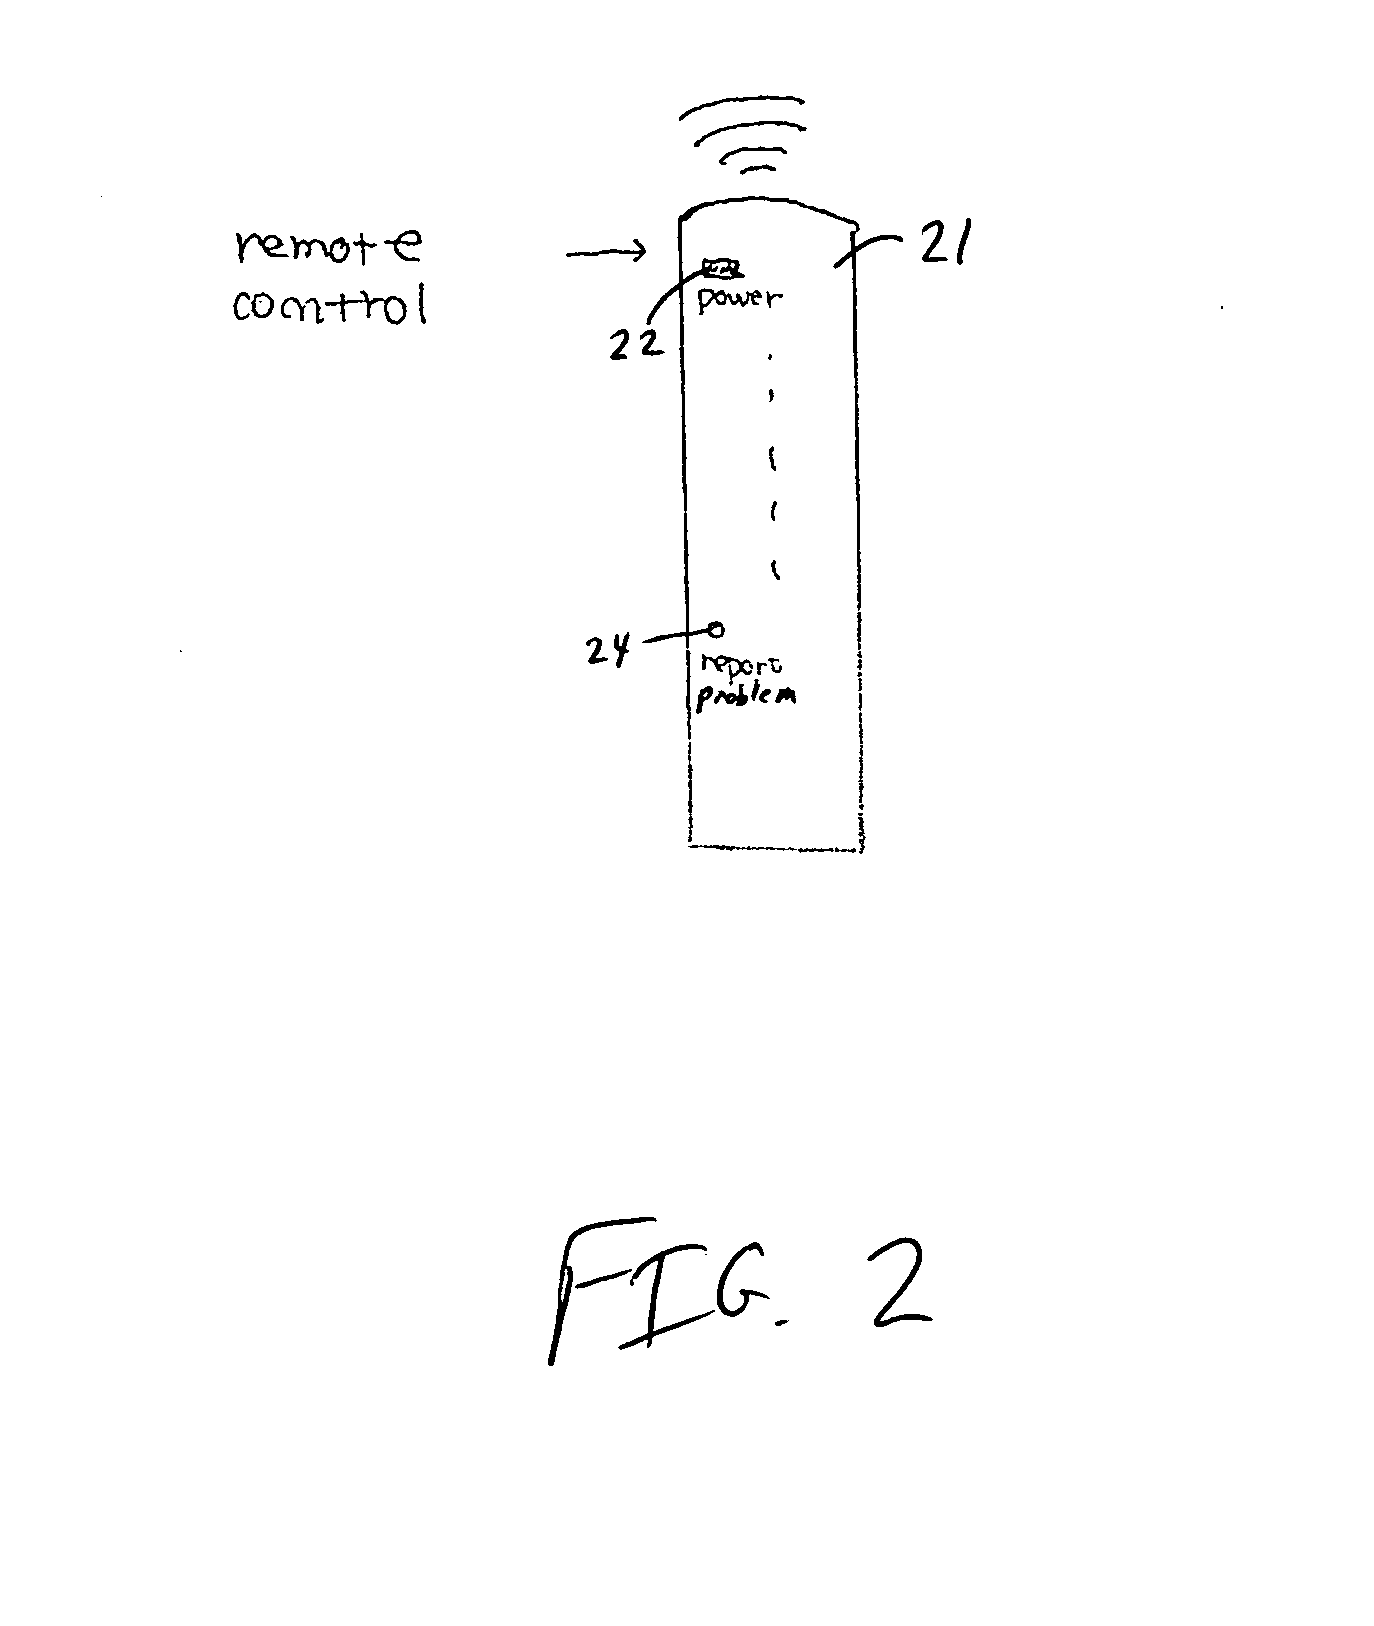 Method and apparatus for performing real-time on-line video quality monitoring for digital cable and IPTV services